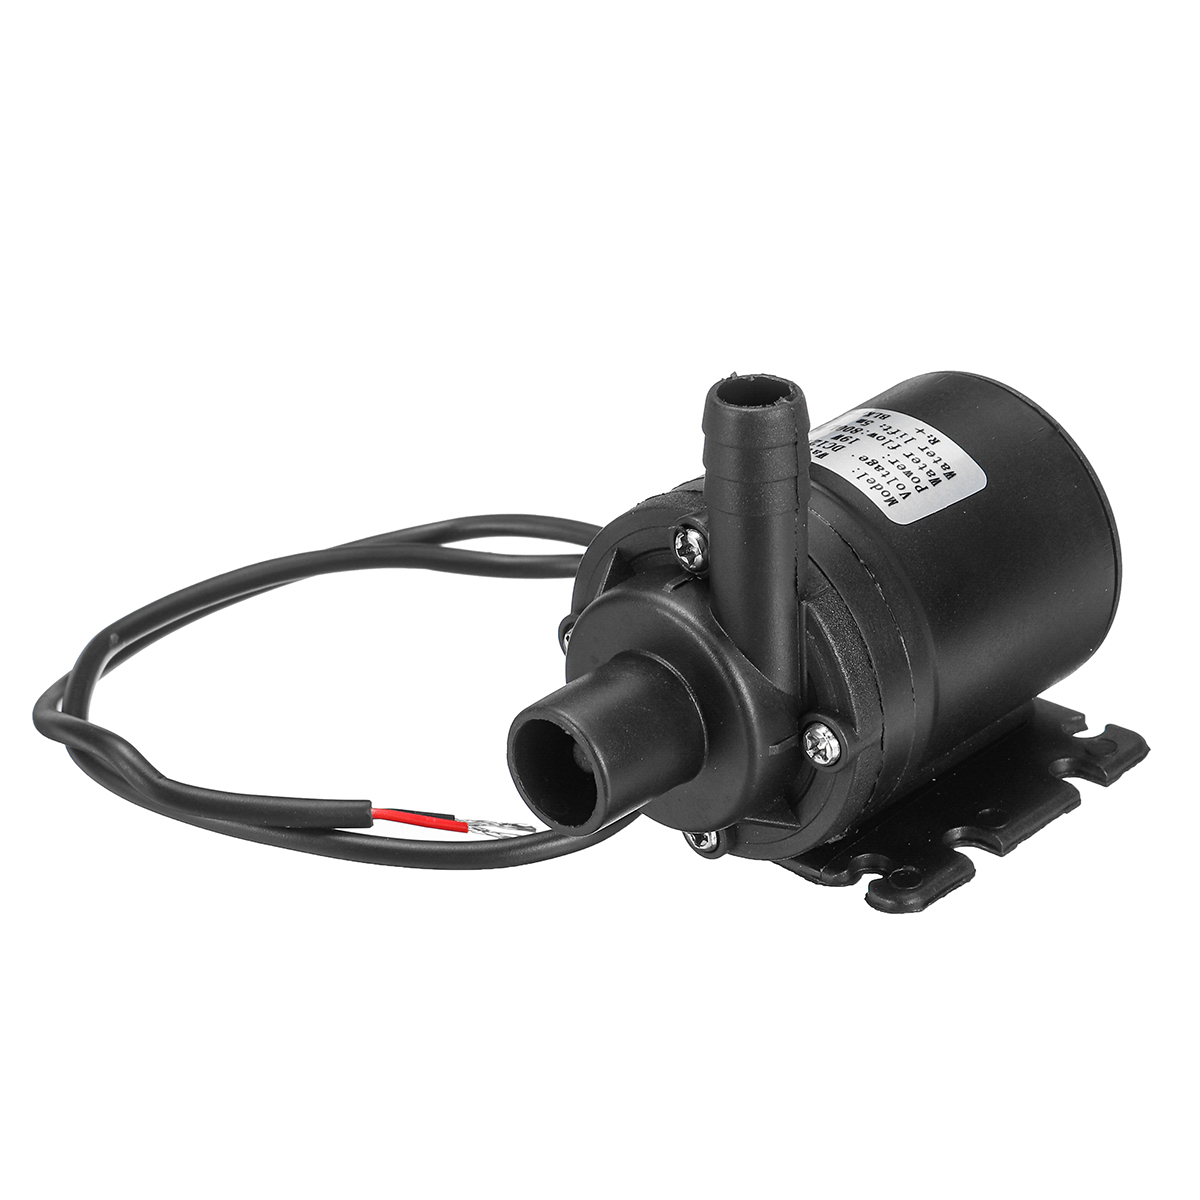 ZYW680-DC-12V-Water-Pump-Ultra-Quiet-Mini-55m-Lift-Brushless-Motor-Submersible-Water-Pump-1531599-6